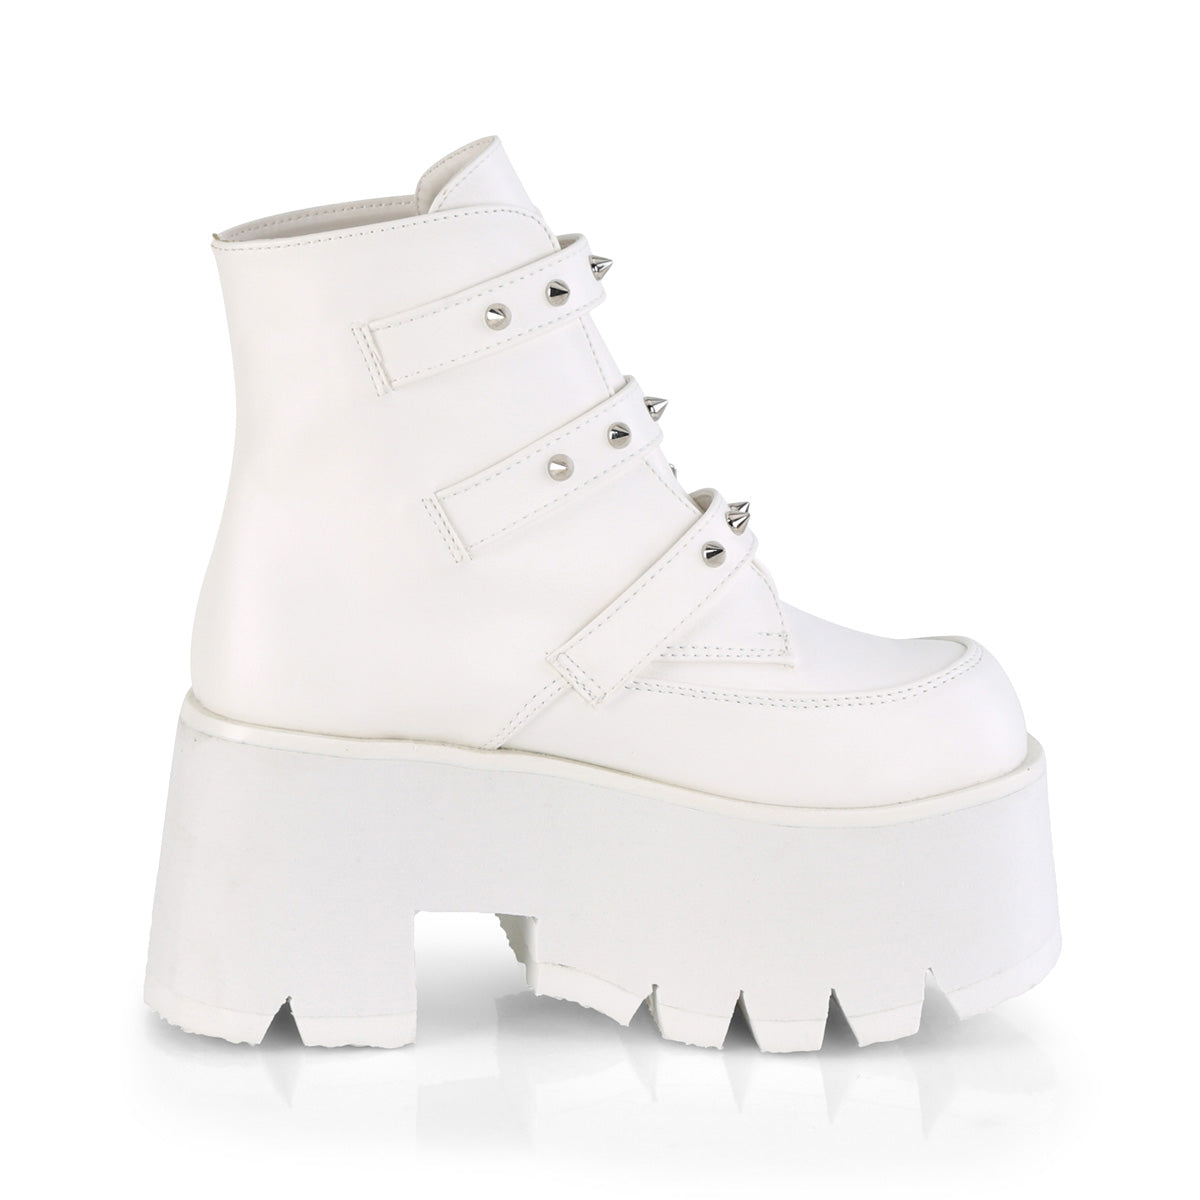 DemoniaCult Womens Ankle Boots ASHES-55 Wht Vegan Leather